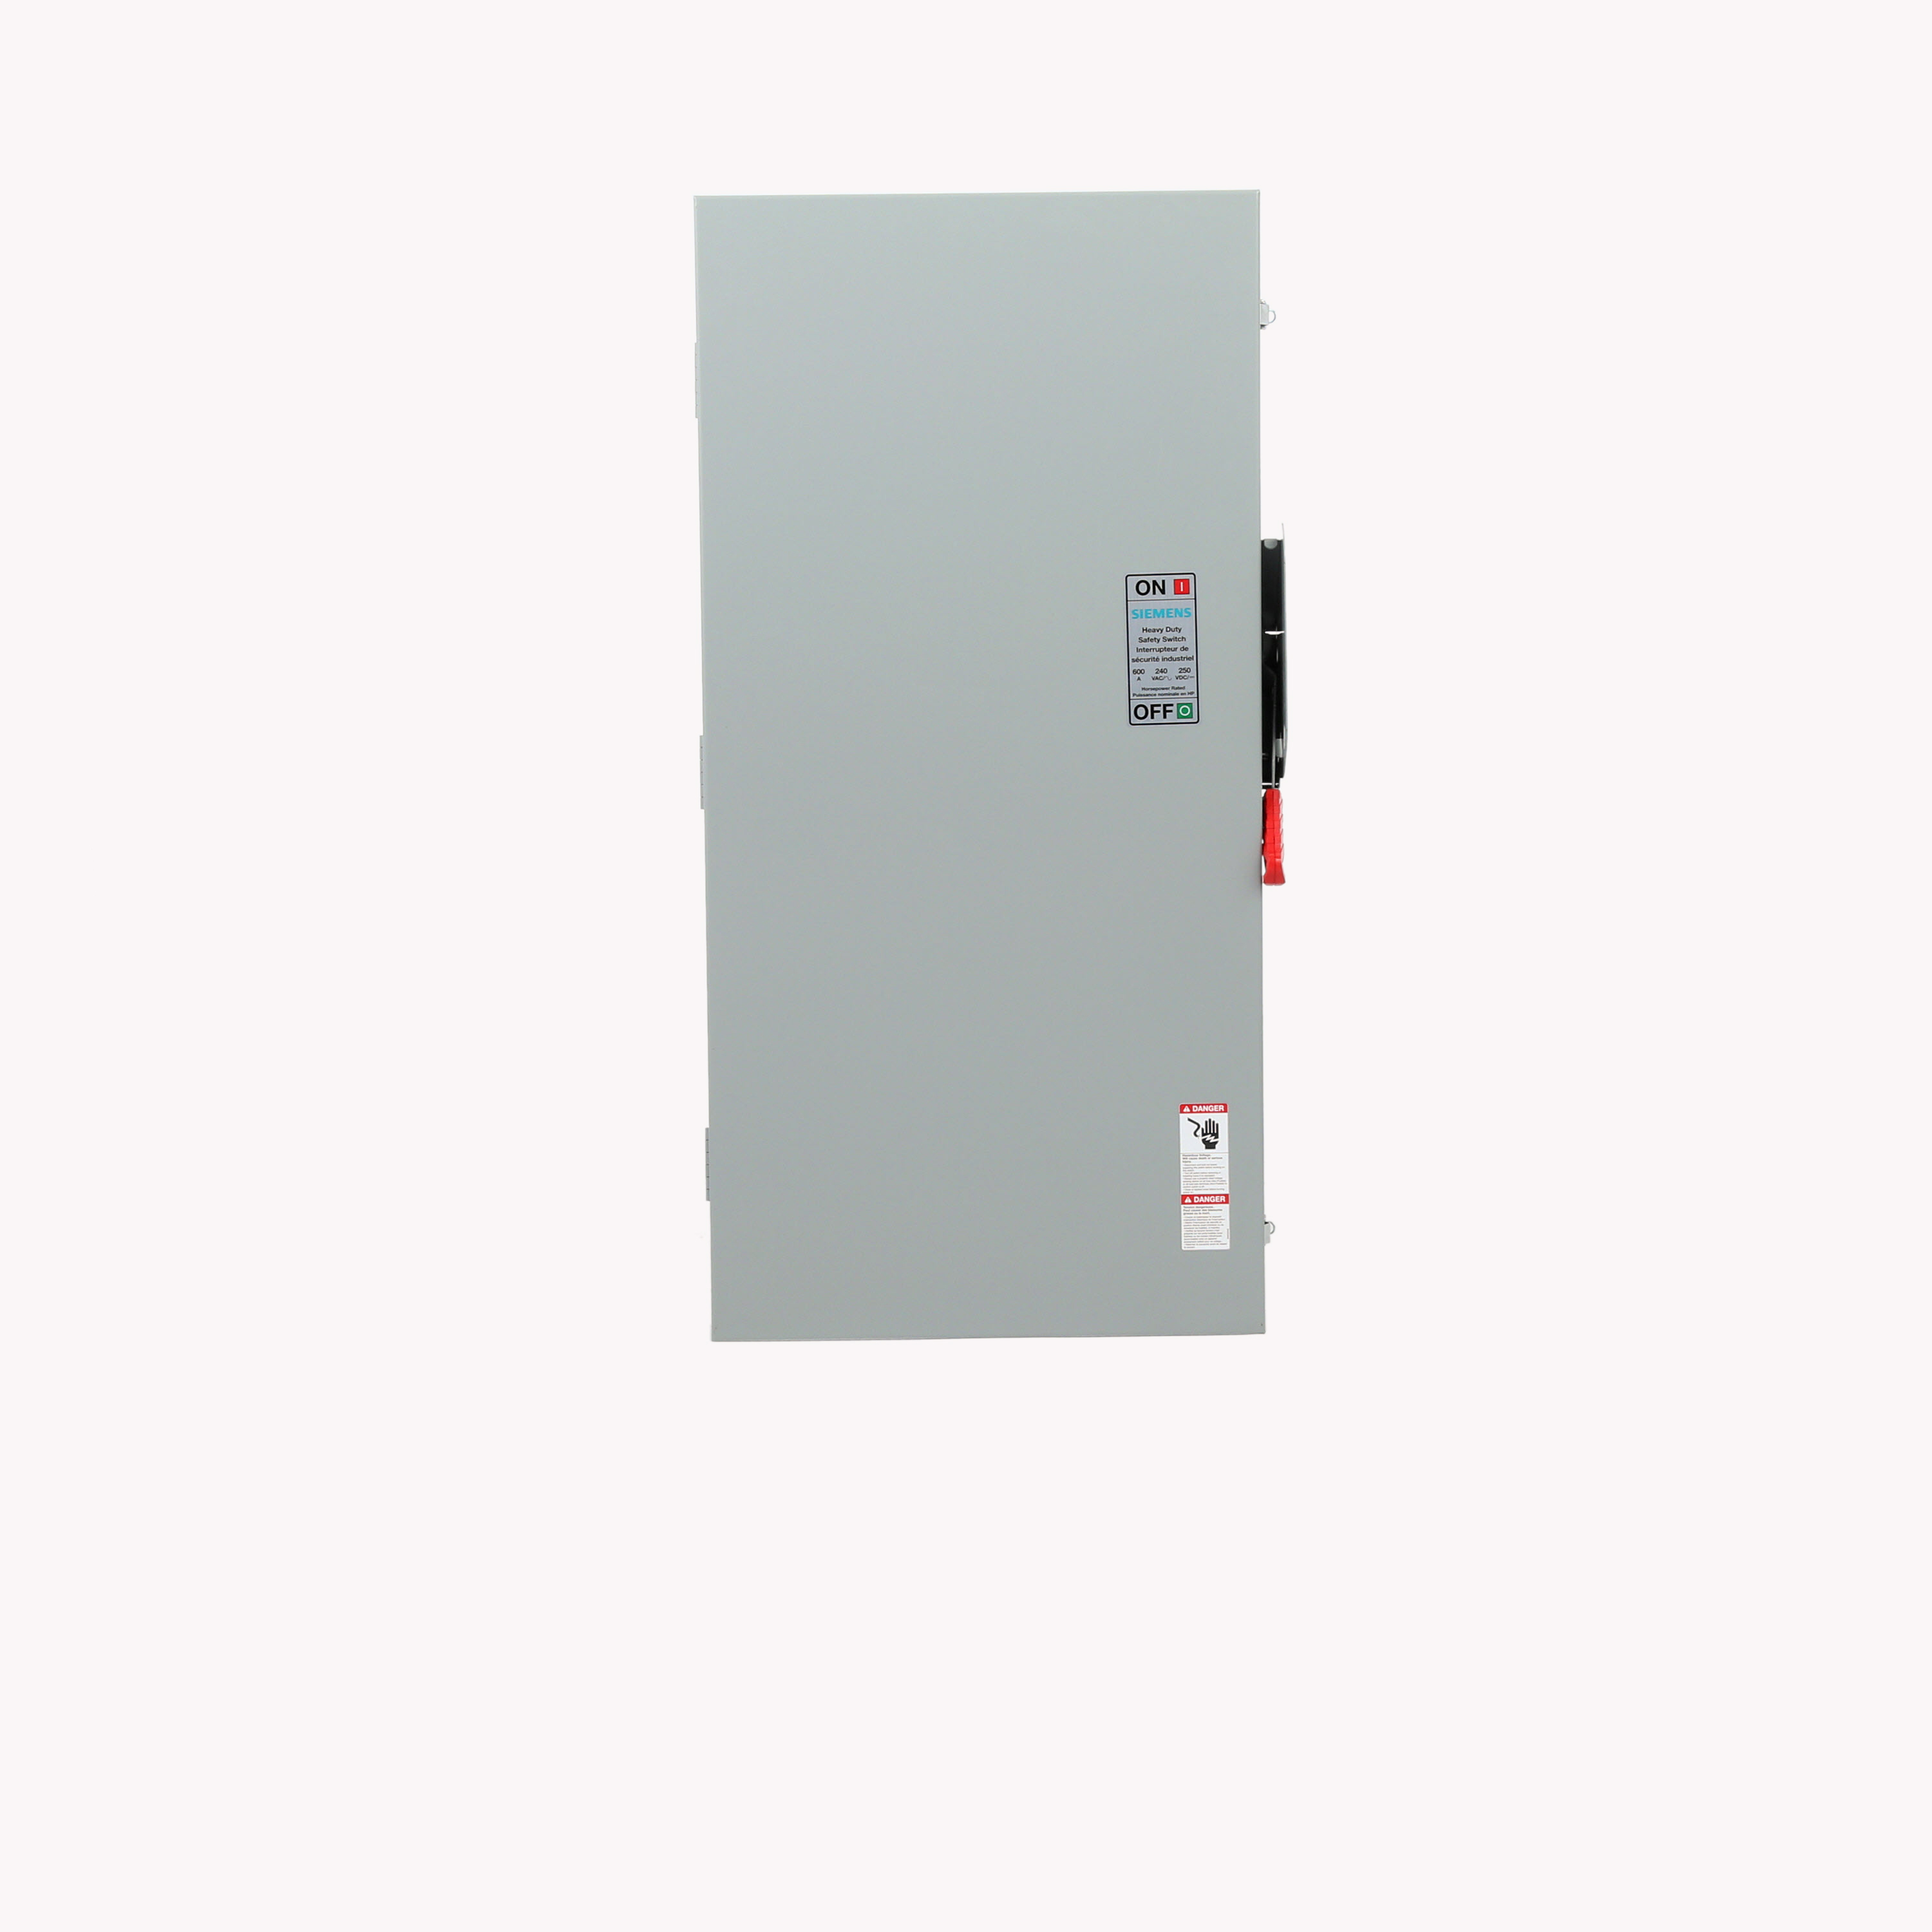 Siemens Low Voltage Circuit Protection Heavy Duty Safety Switch. 3-Pole 3-Fuse and solid neutral Fused in a type 1 enclosure (indoor). Rated 240VAC (600A).